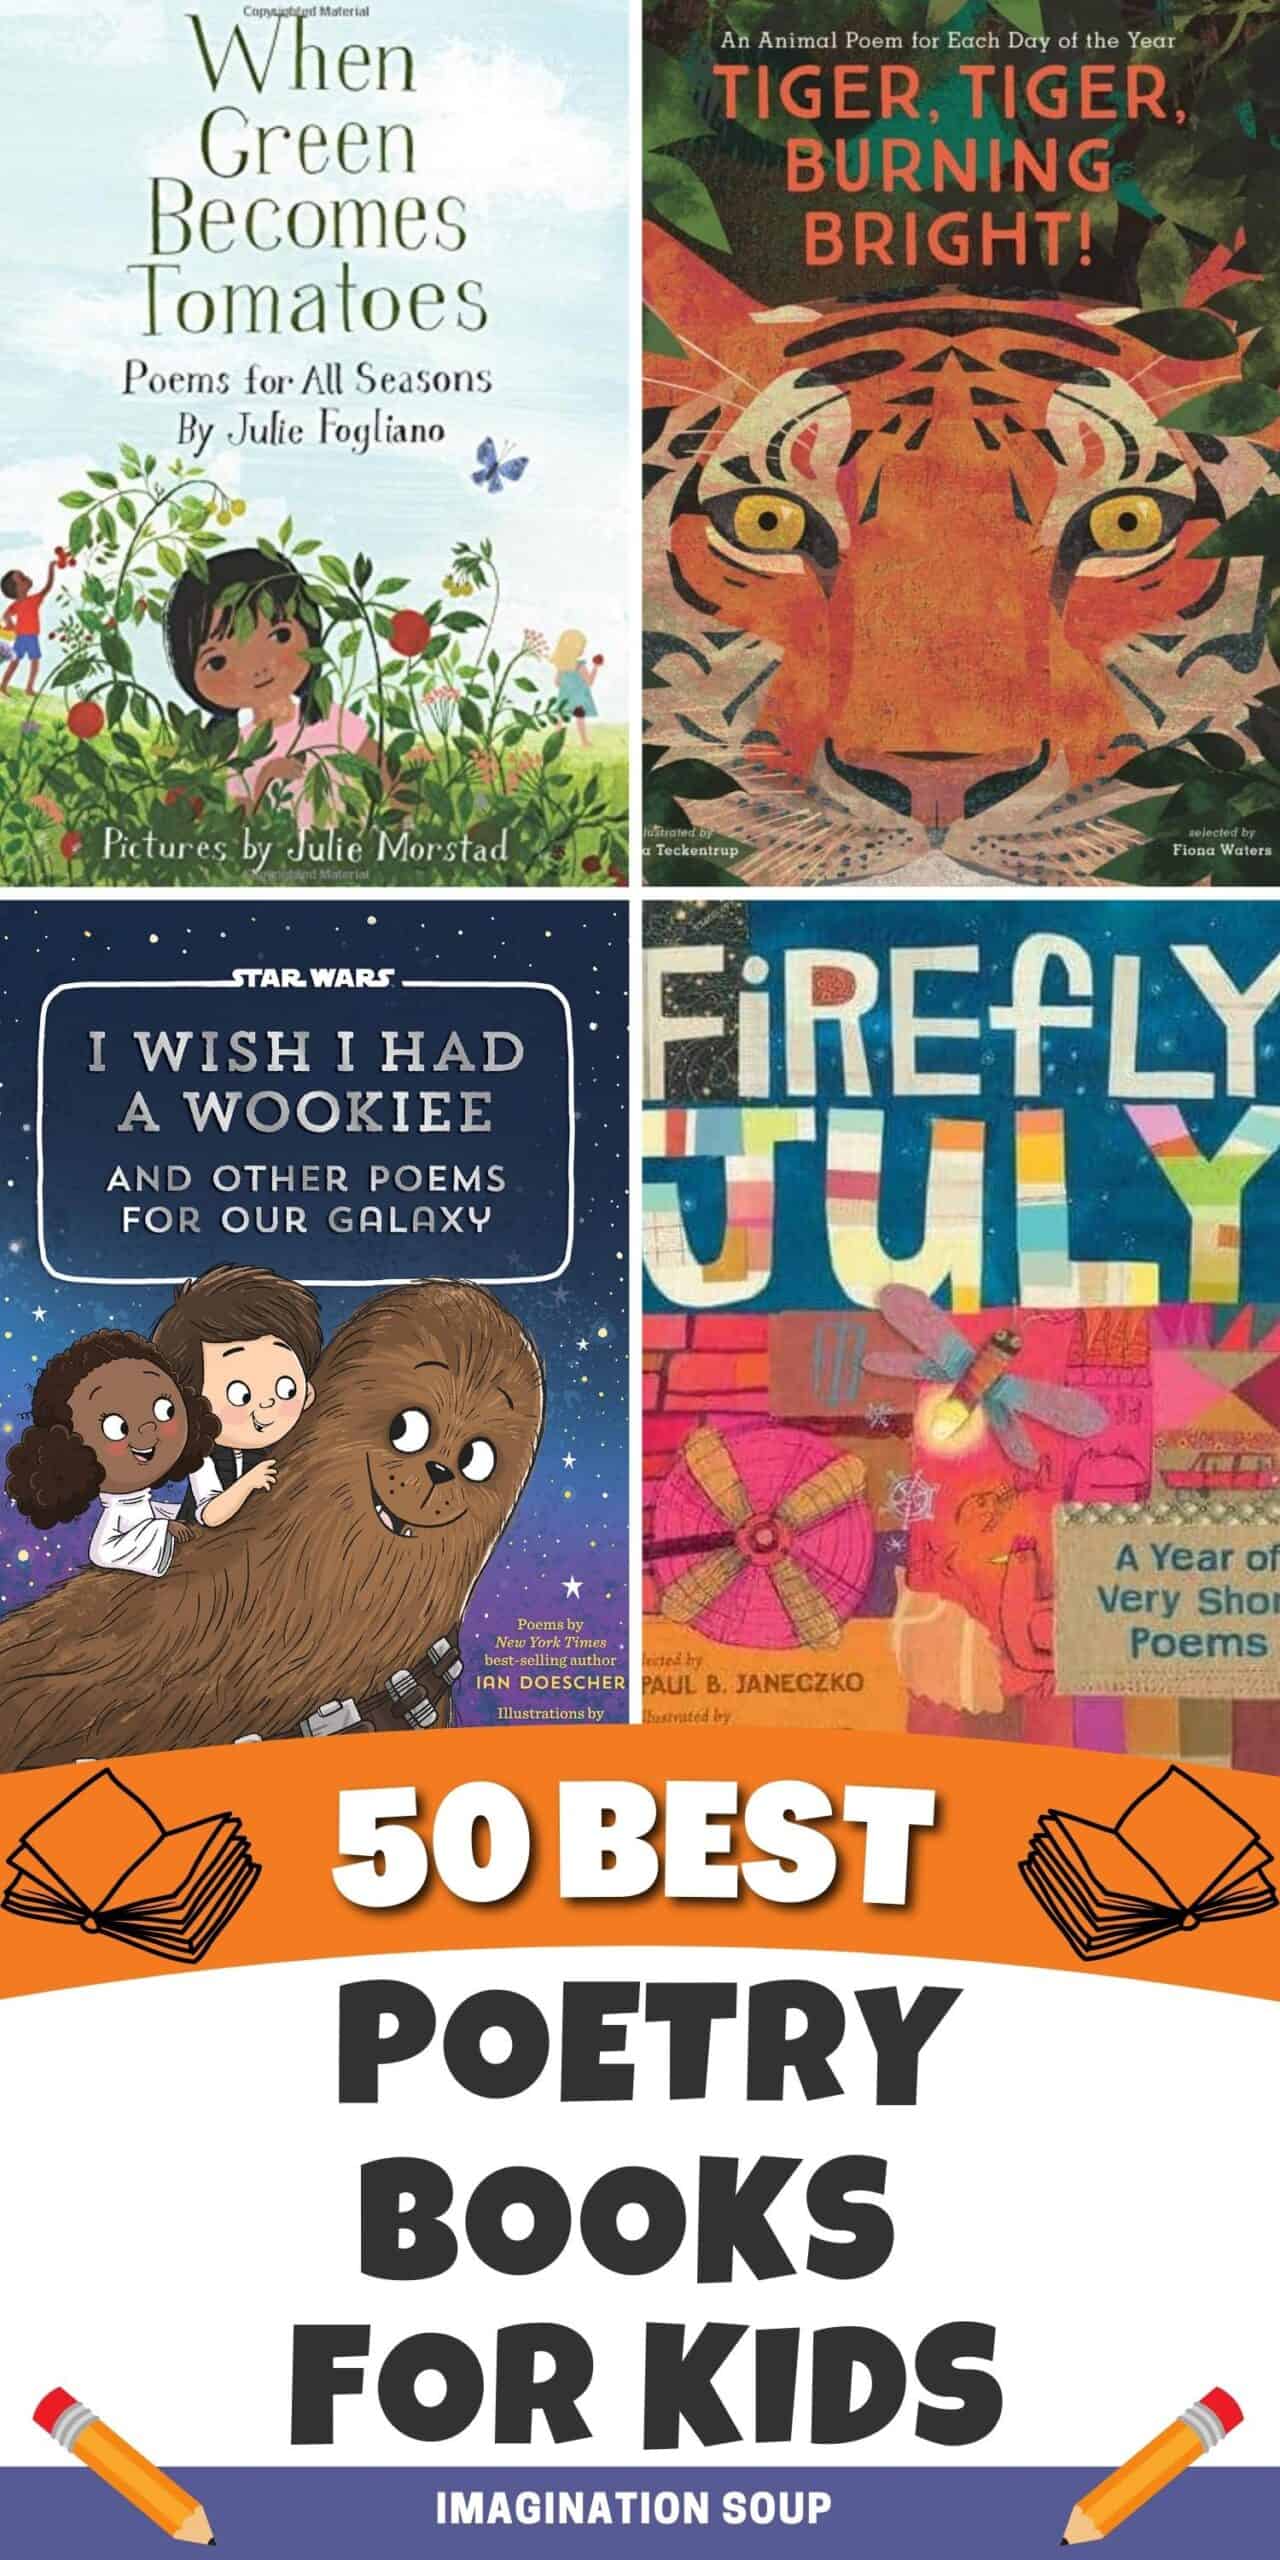 50 best poetry books for kids